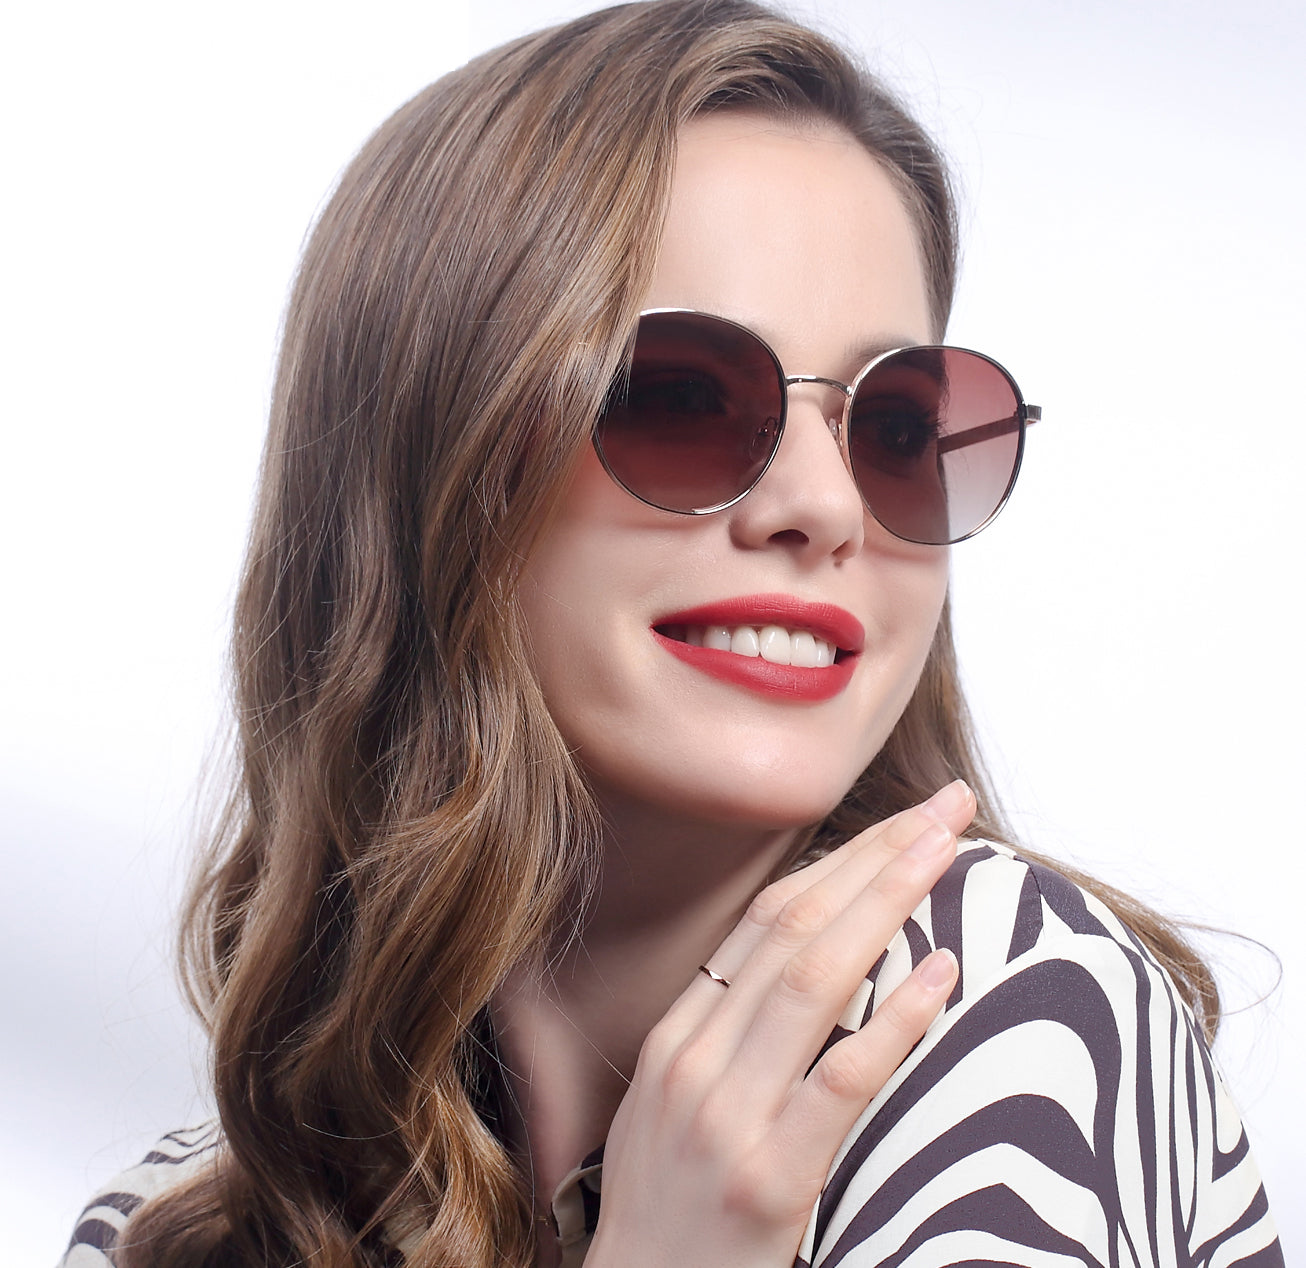 What are fashionable sunglasses for women in 2023?